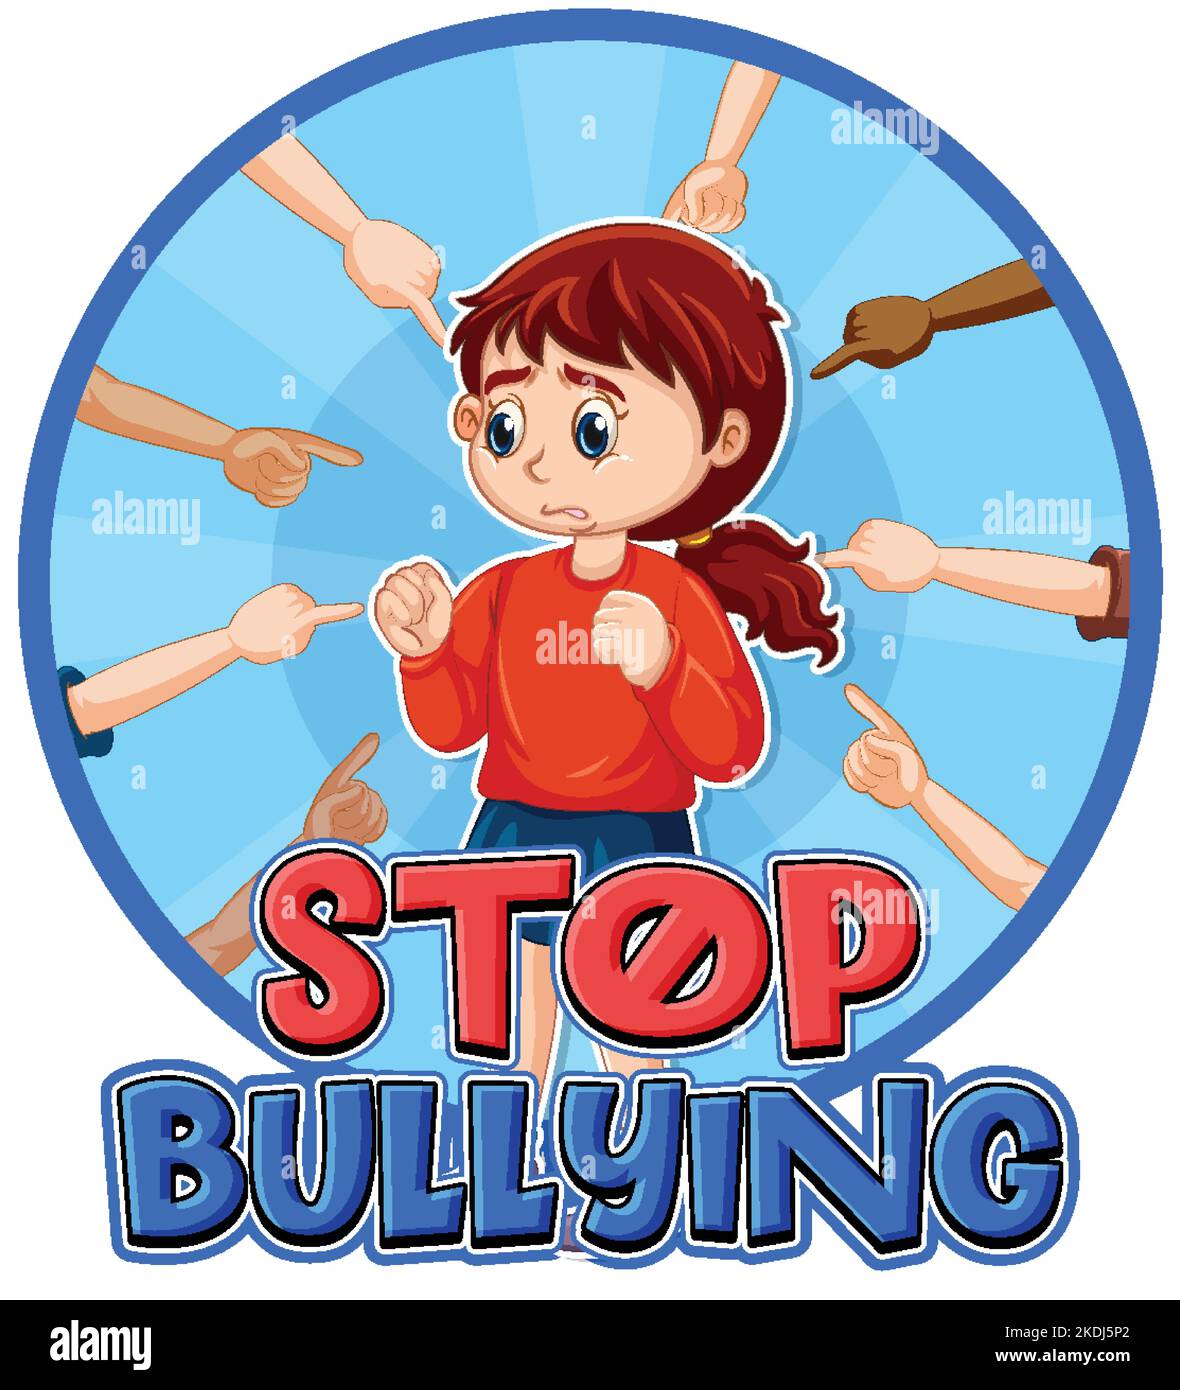 Stop Bullying Text With Cartoon Character Illustration Stock Vector Image And Art Alamy